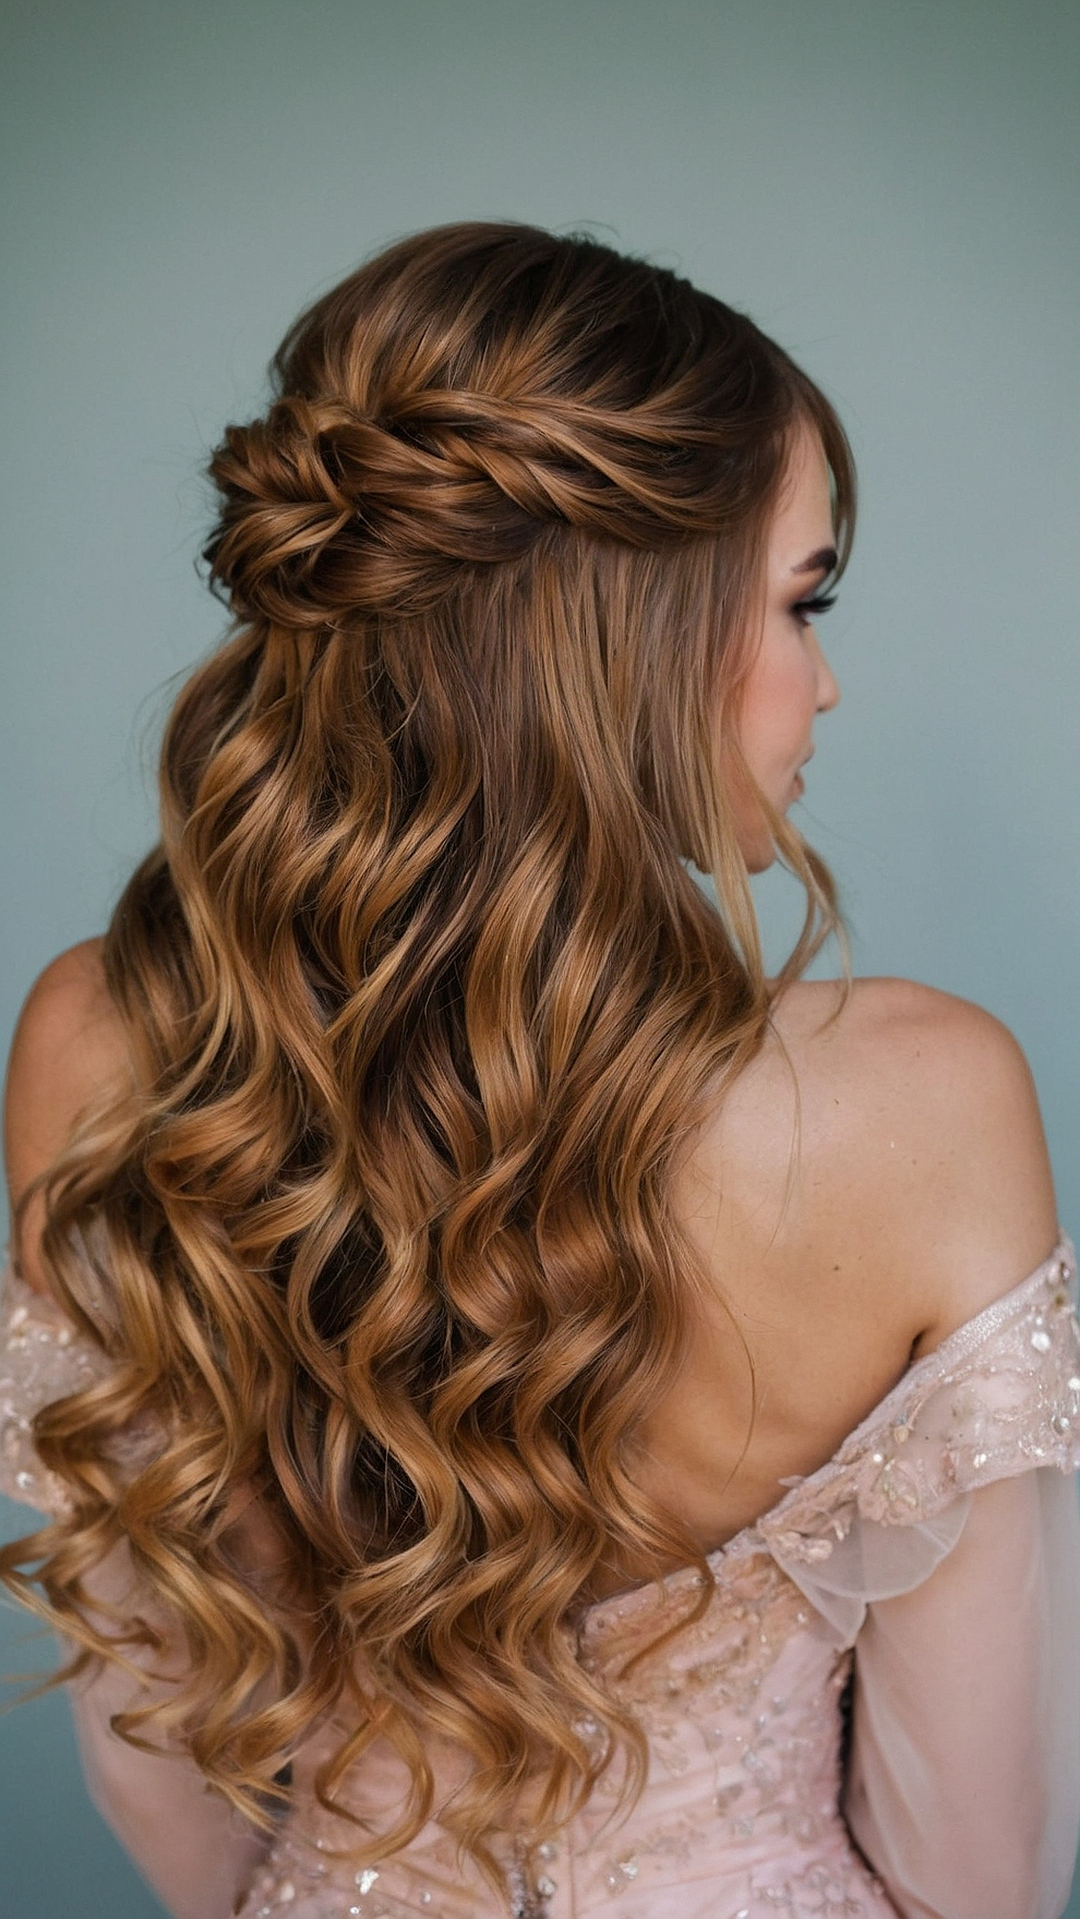 Adorable Braided Prom Hairstyles for a Sweet Look